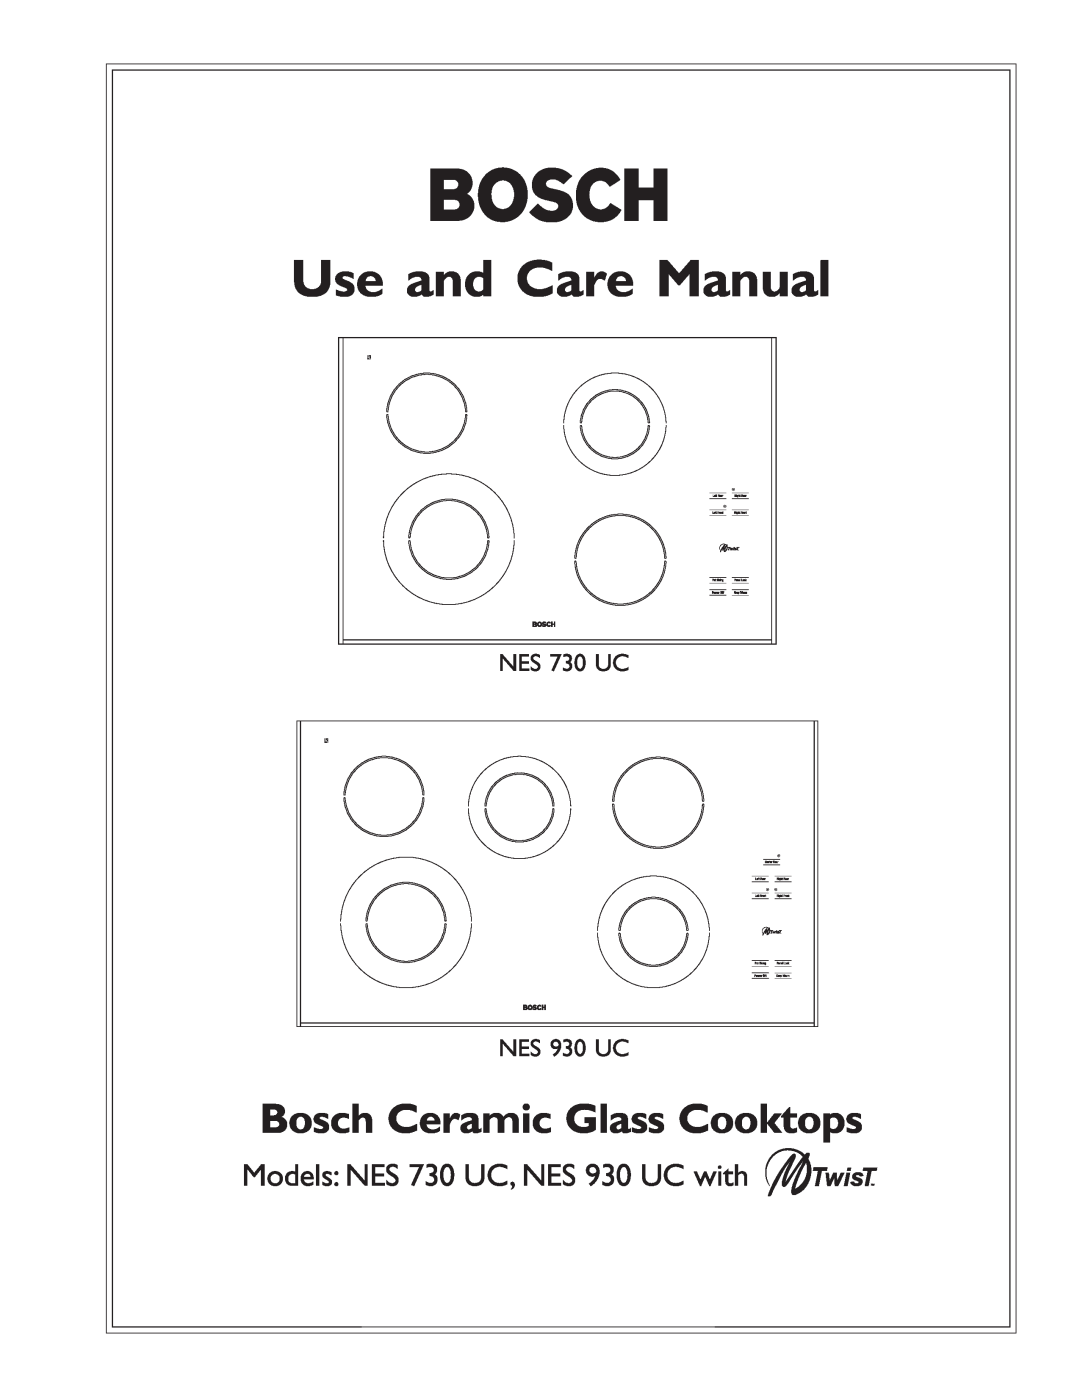 Bosch Appliances manual Use and Care Manual, Bosch Ceramic Glass Cooktops, Models NES 730 UC, NES 930 UC with 